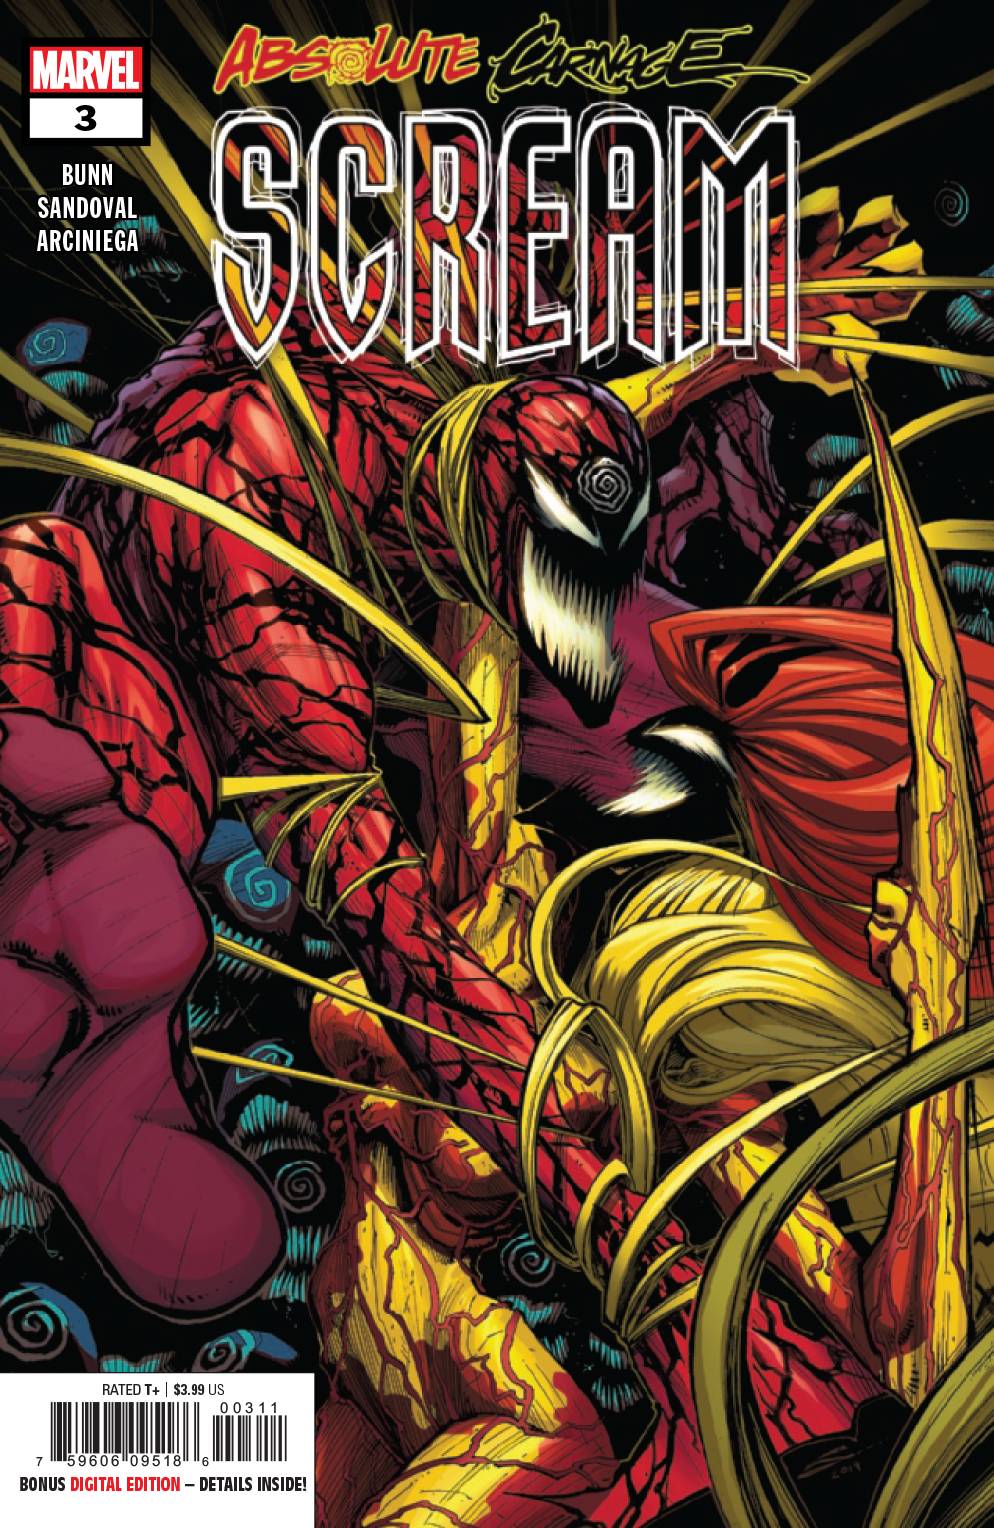 ABSOLUTE CARNAGE SCREAM #3 (OF 3) AC